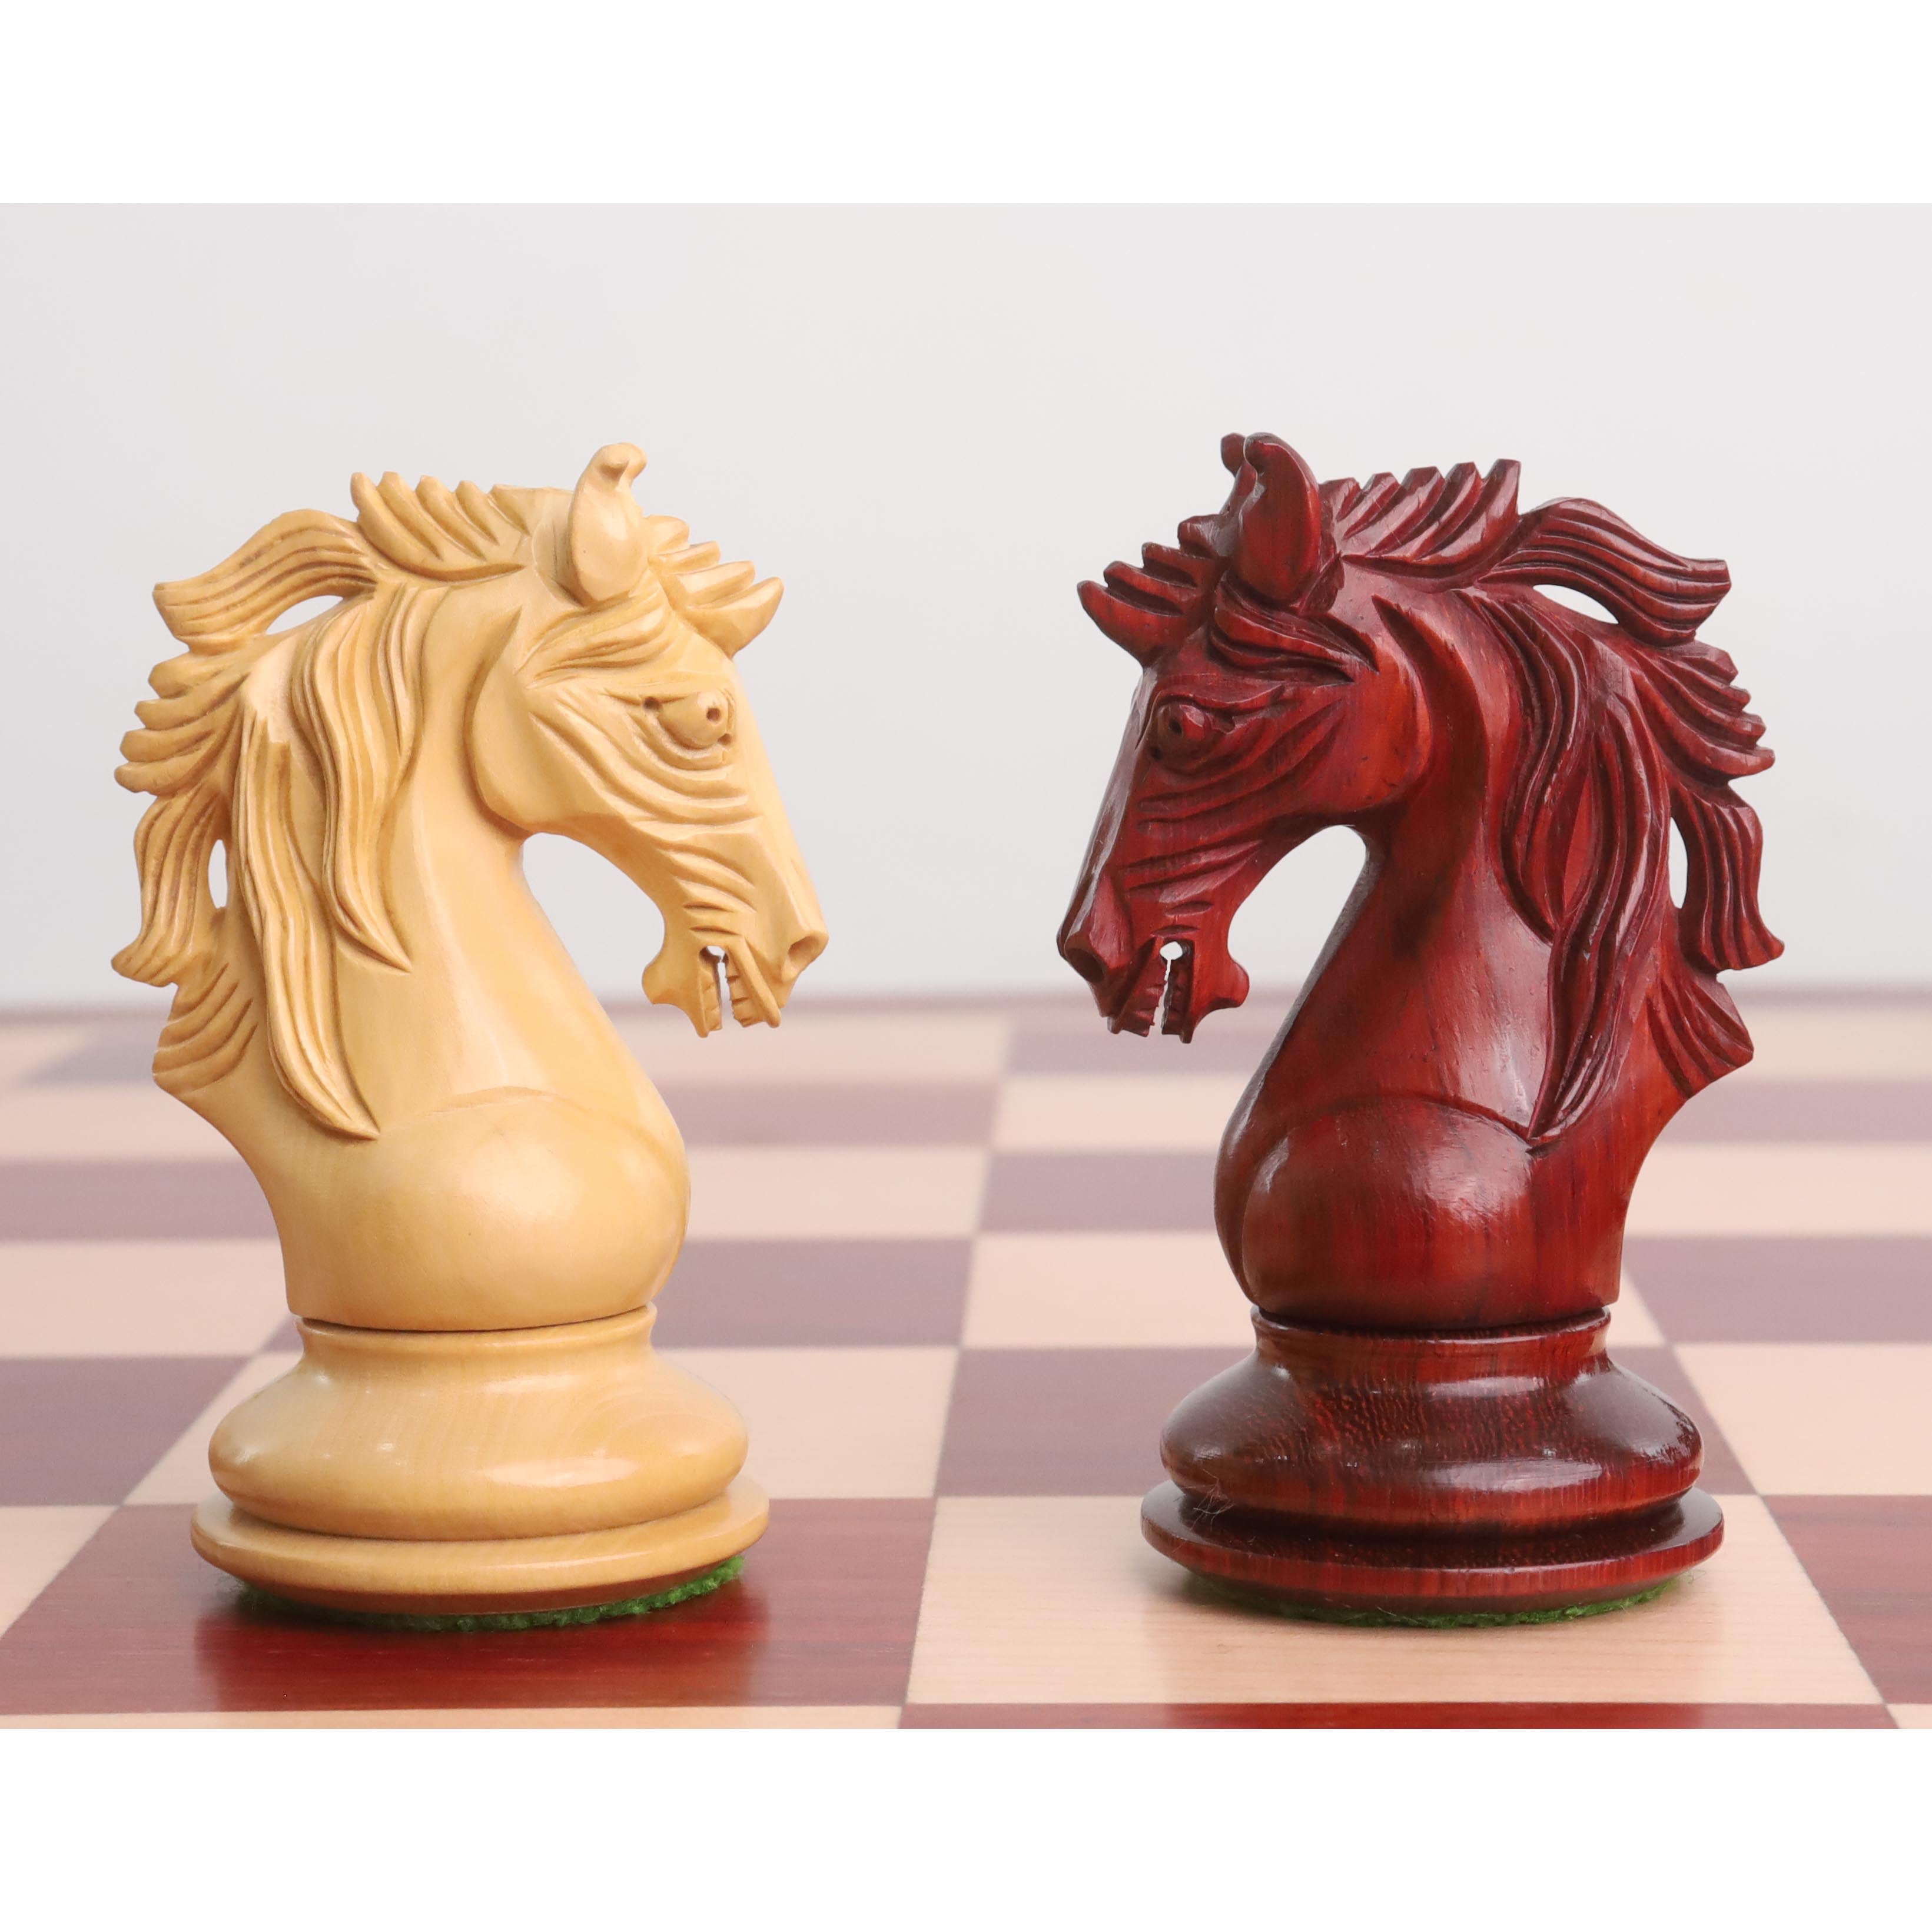 4.4" Goliath Series Luxury Staunton Chess Set- Chess Pieces Only - Bud Rosewood & Boxwood